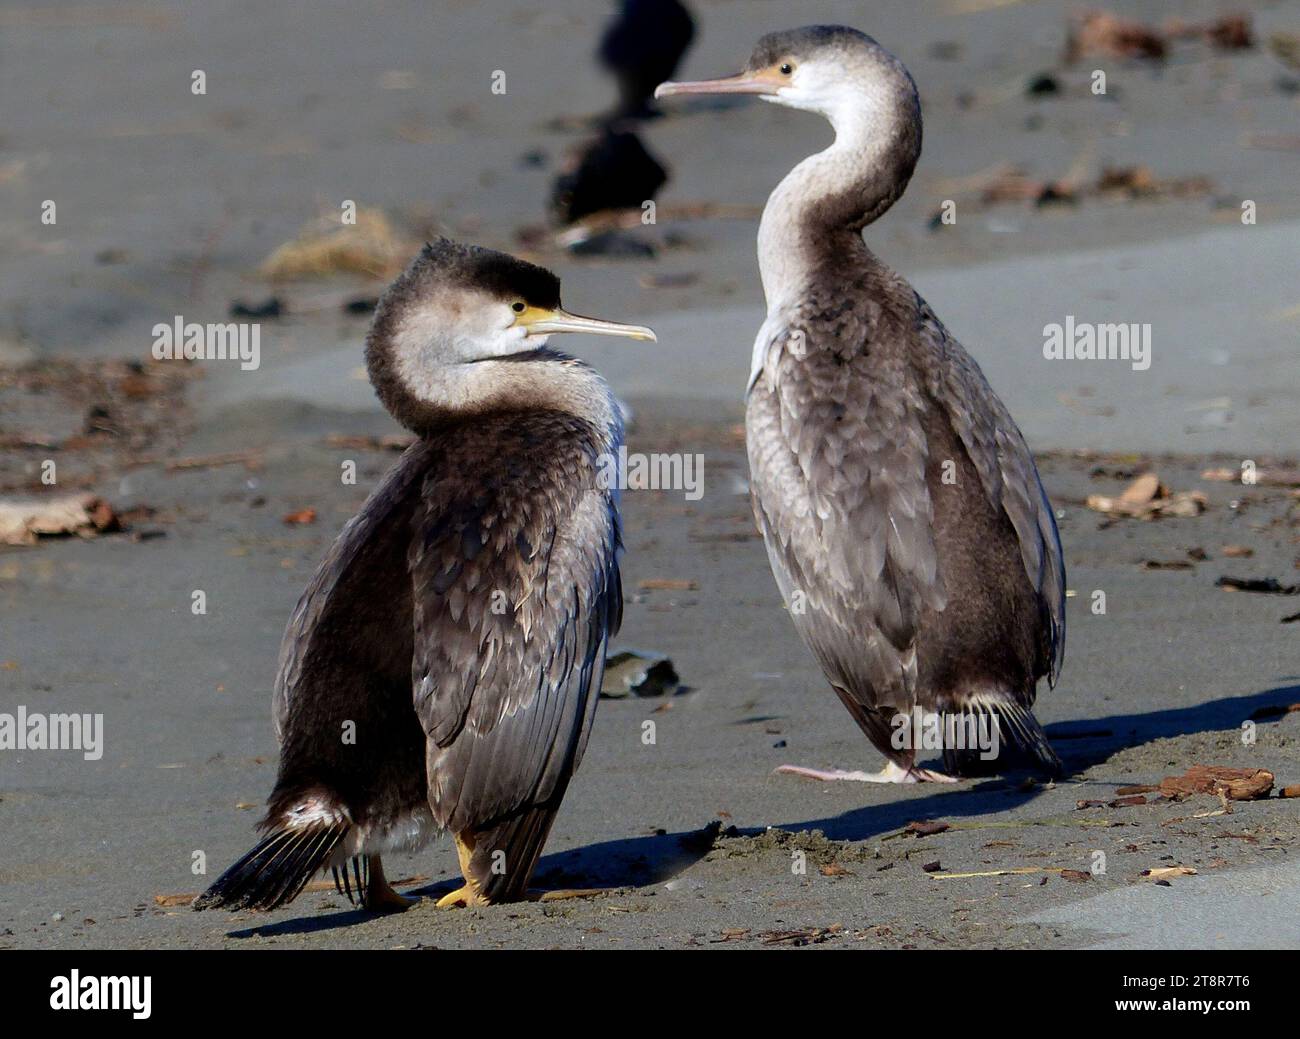 A pair of Pied Shags. NZ, Pied shags mainly inhabit coastal habitats about much of New Zealand. Adults have the crown, back of the neck, mantle, rump, wings, thighs and tail black, although on close inspection the upper wing coverts are grey-black with a thin black border. The face, throat, sides of neck and underparts are white. The long, hooked beak is grey, the iris is green, and legs and feet black. On breeding adults, the skin in front of the eye is yellow, at the base of beak is pink or pink-red, and the eye-ring is blue. Non-breeding adults have paler skin colours than breeders. Stock Photo